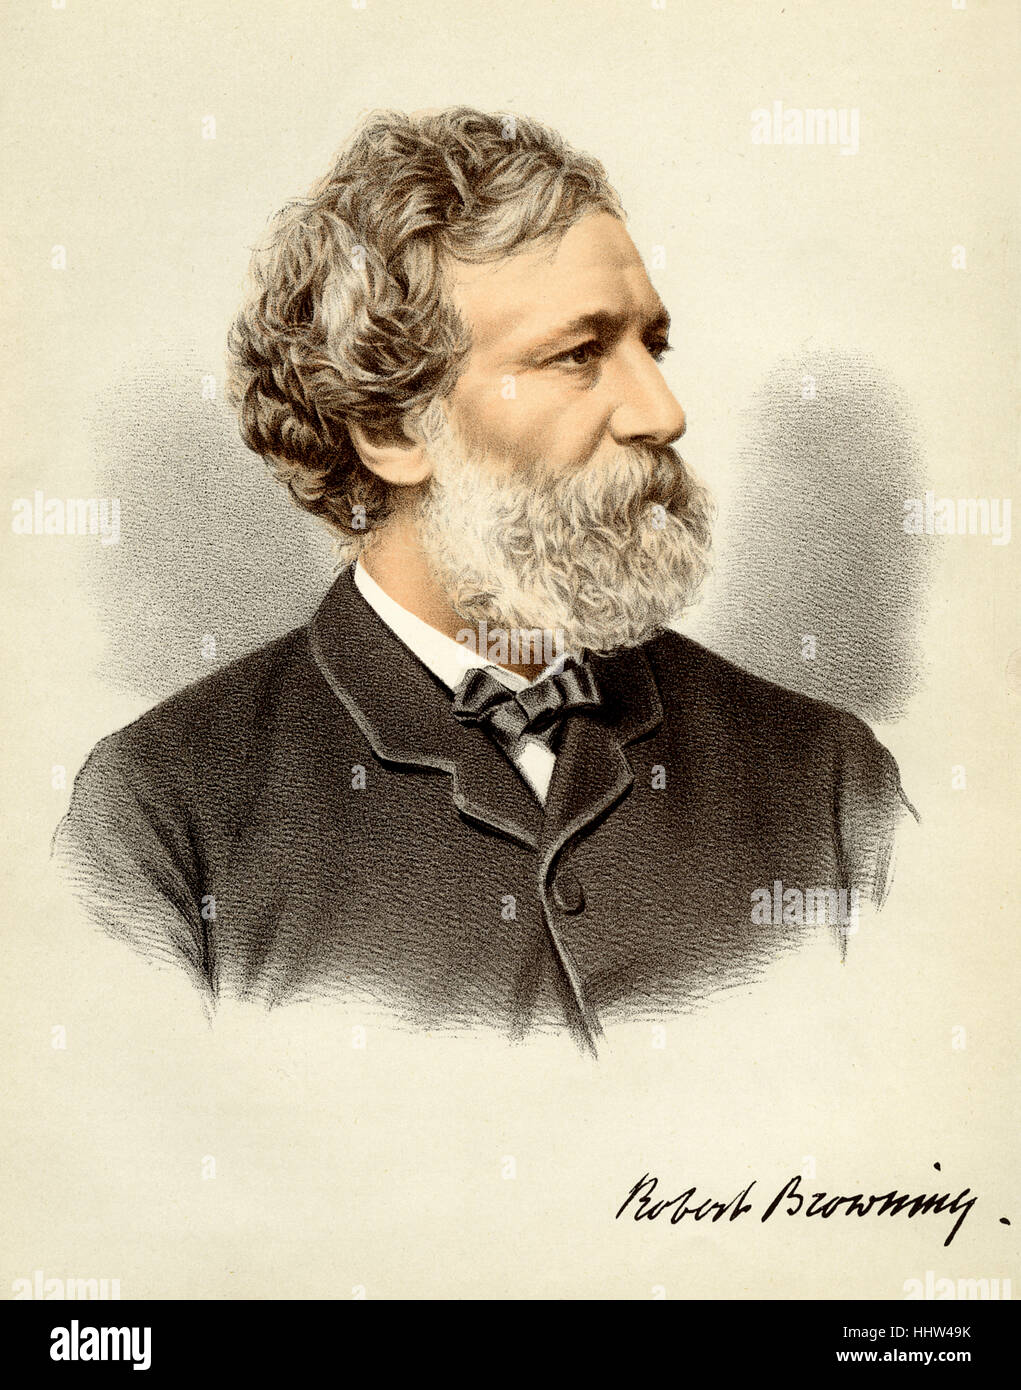 Robert Browning. English poet and playwright. 7 May 1812 - 12 December 1889 Stock Photo